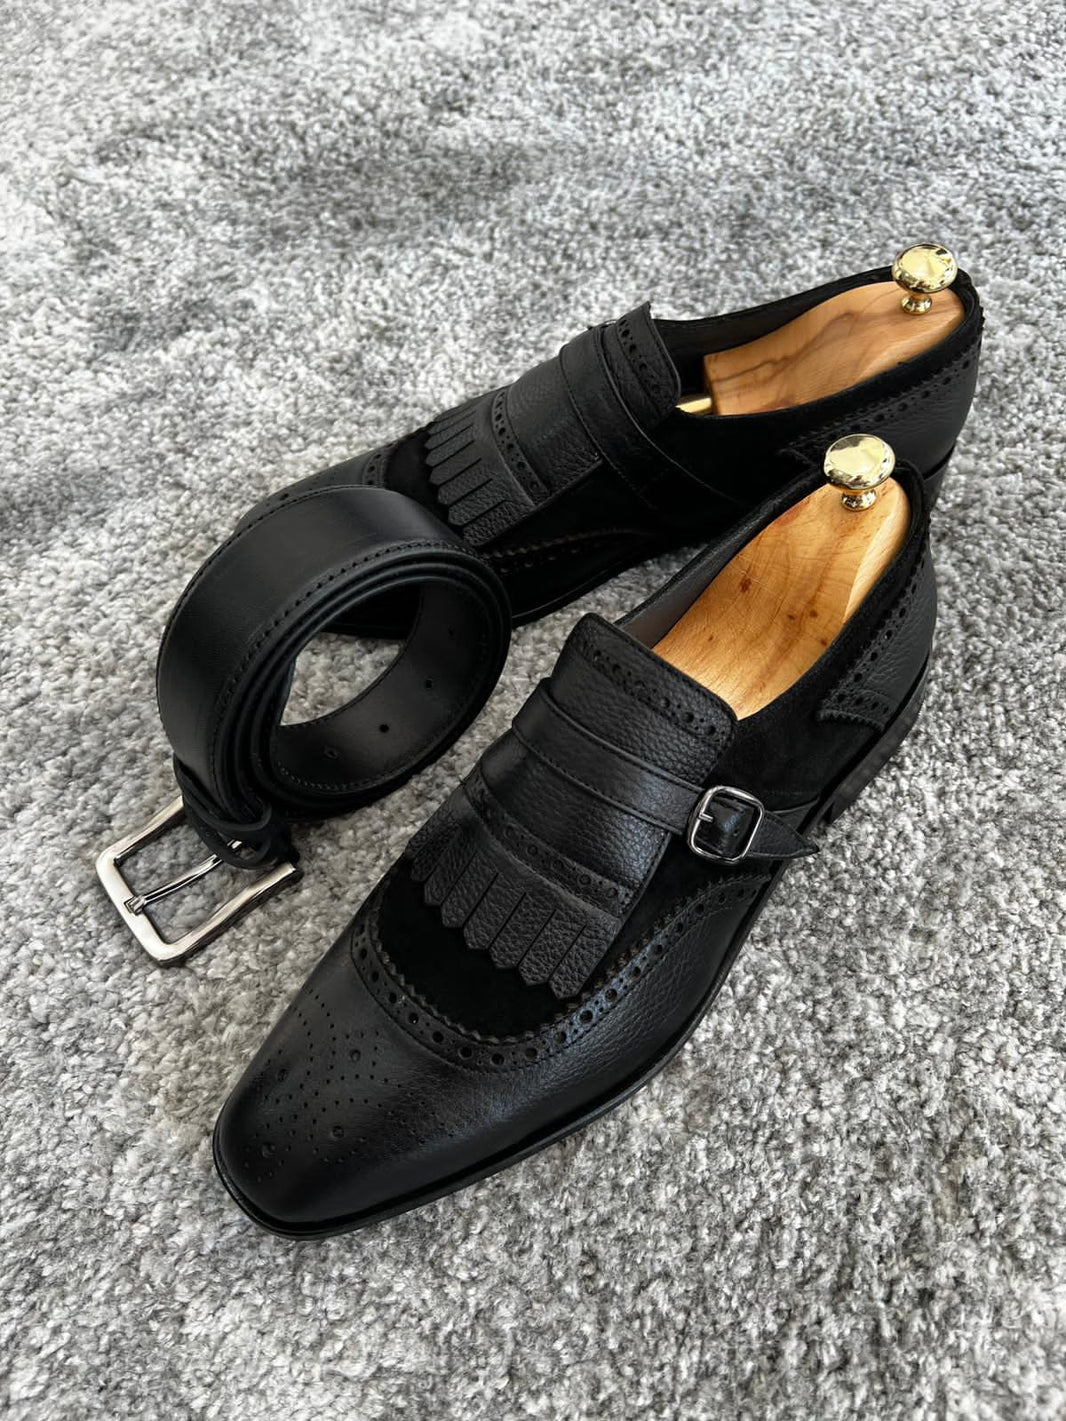 Shop Stylish Men's Loafers - Casual & Leather Loafers for Men ...